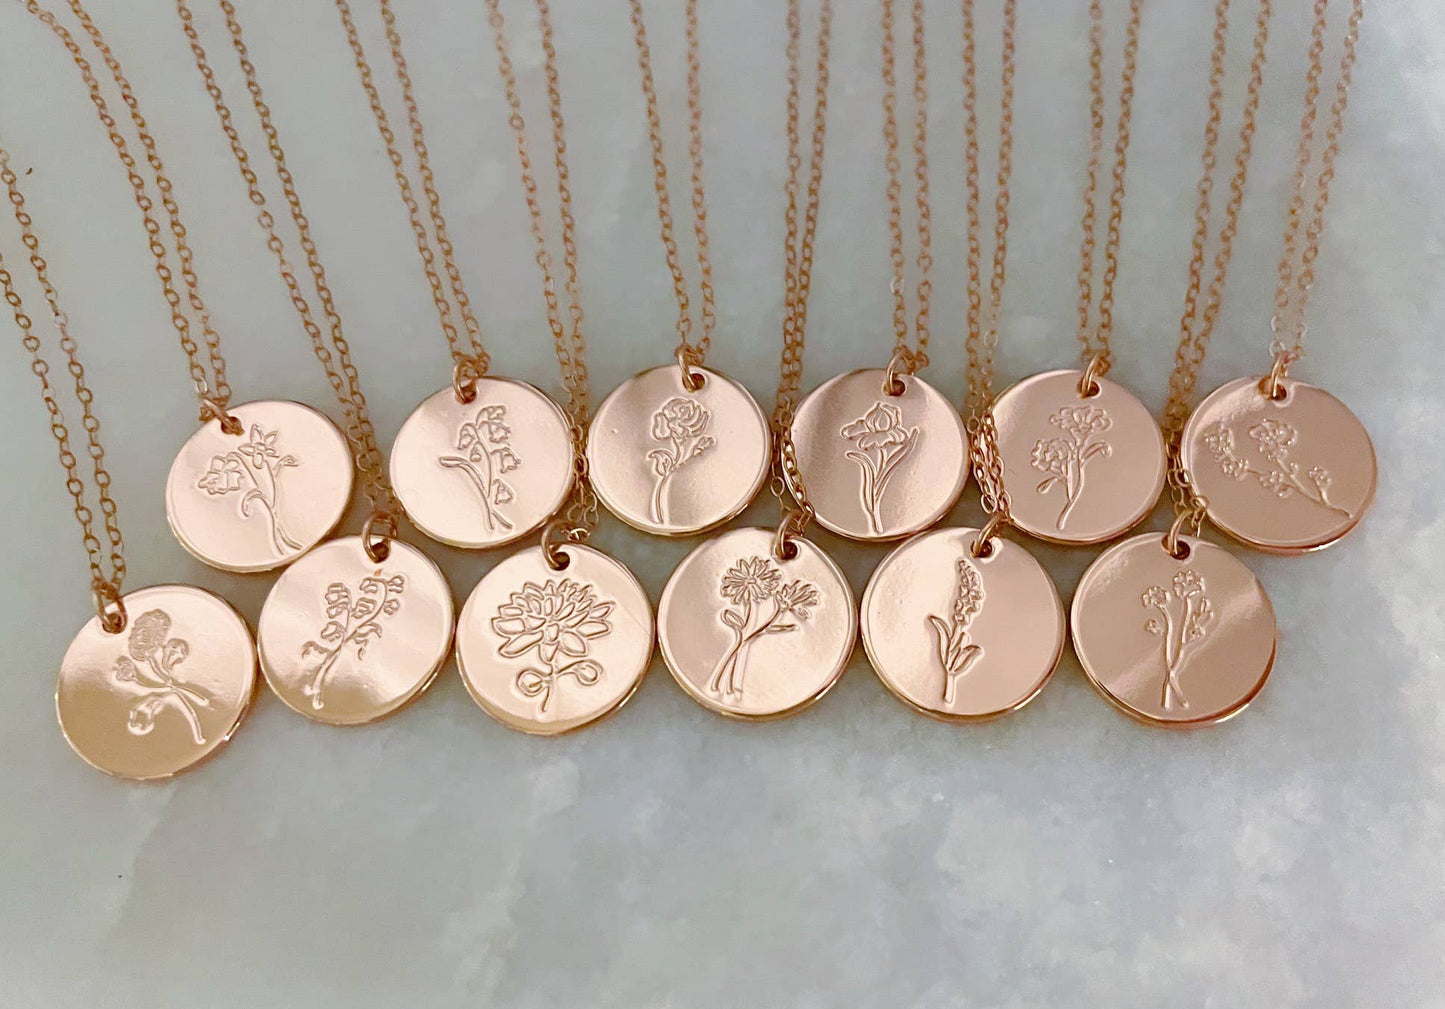 Rose Gold Birth Flower Necklace, Mothers Day Jewelry Gift: December-narcissus Spring-Summer Laalee Jewelry